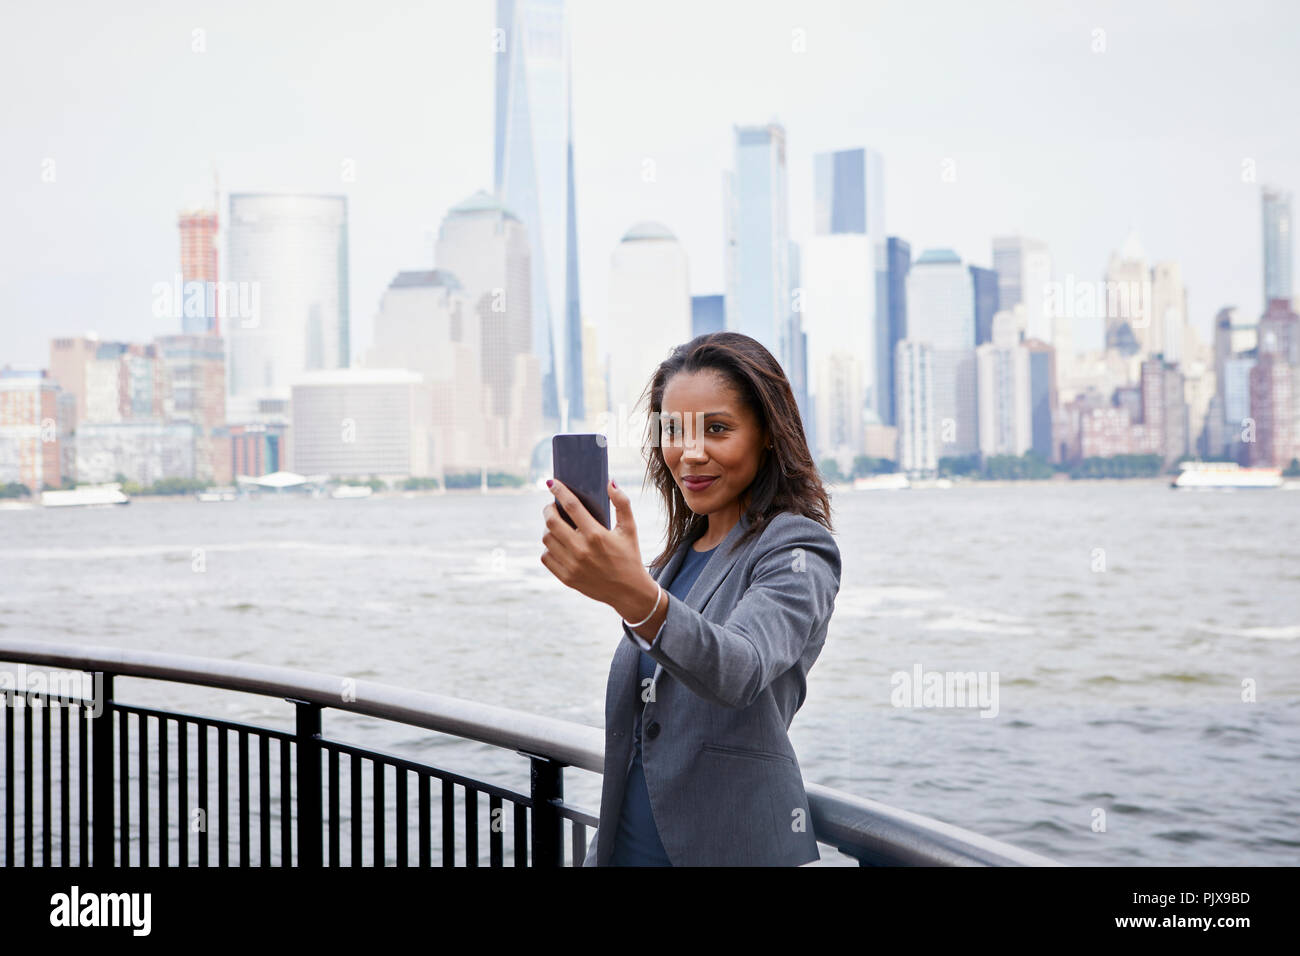 Businesswoman prenant, selfies New York City Skyline in background Banque D'Images